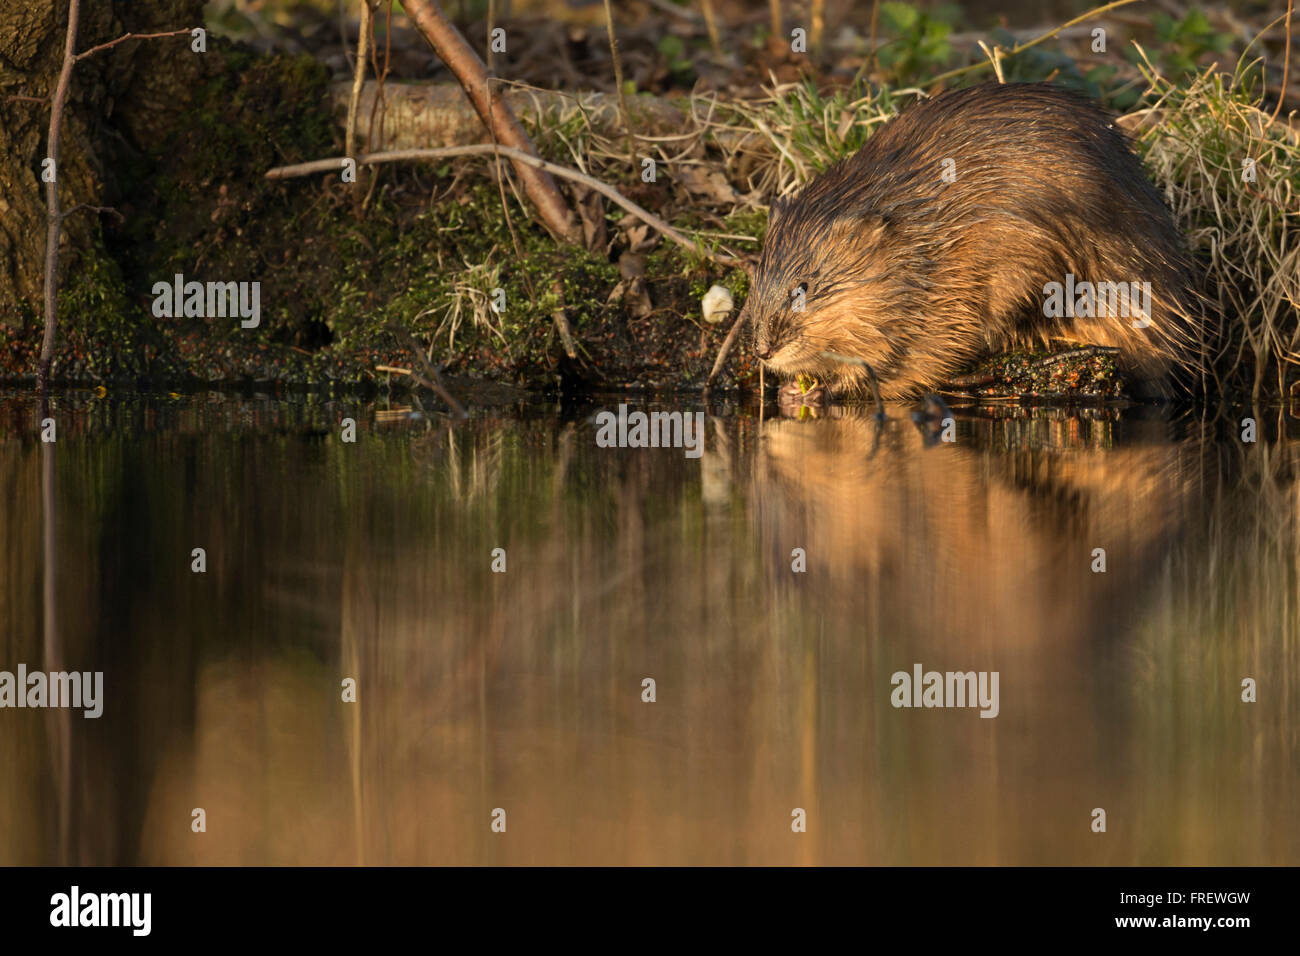 Muskrat / Bisamratte ( Ondatra zibethicus ) introduced species, sits next to a river in best light, eating some greenery. Stock Photo